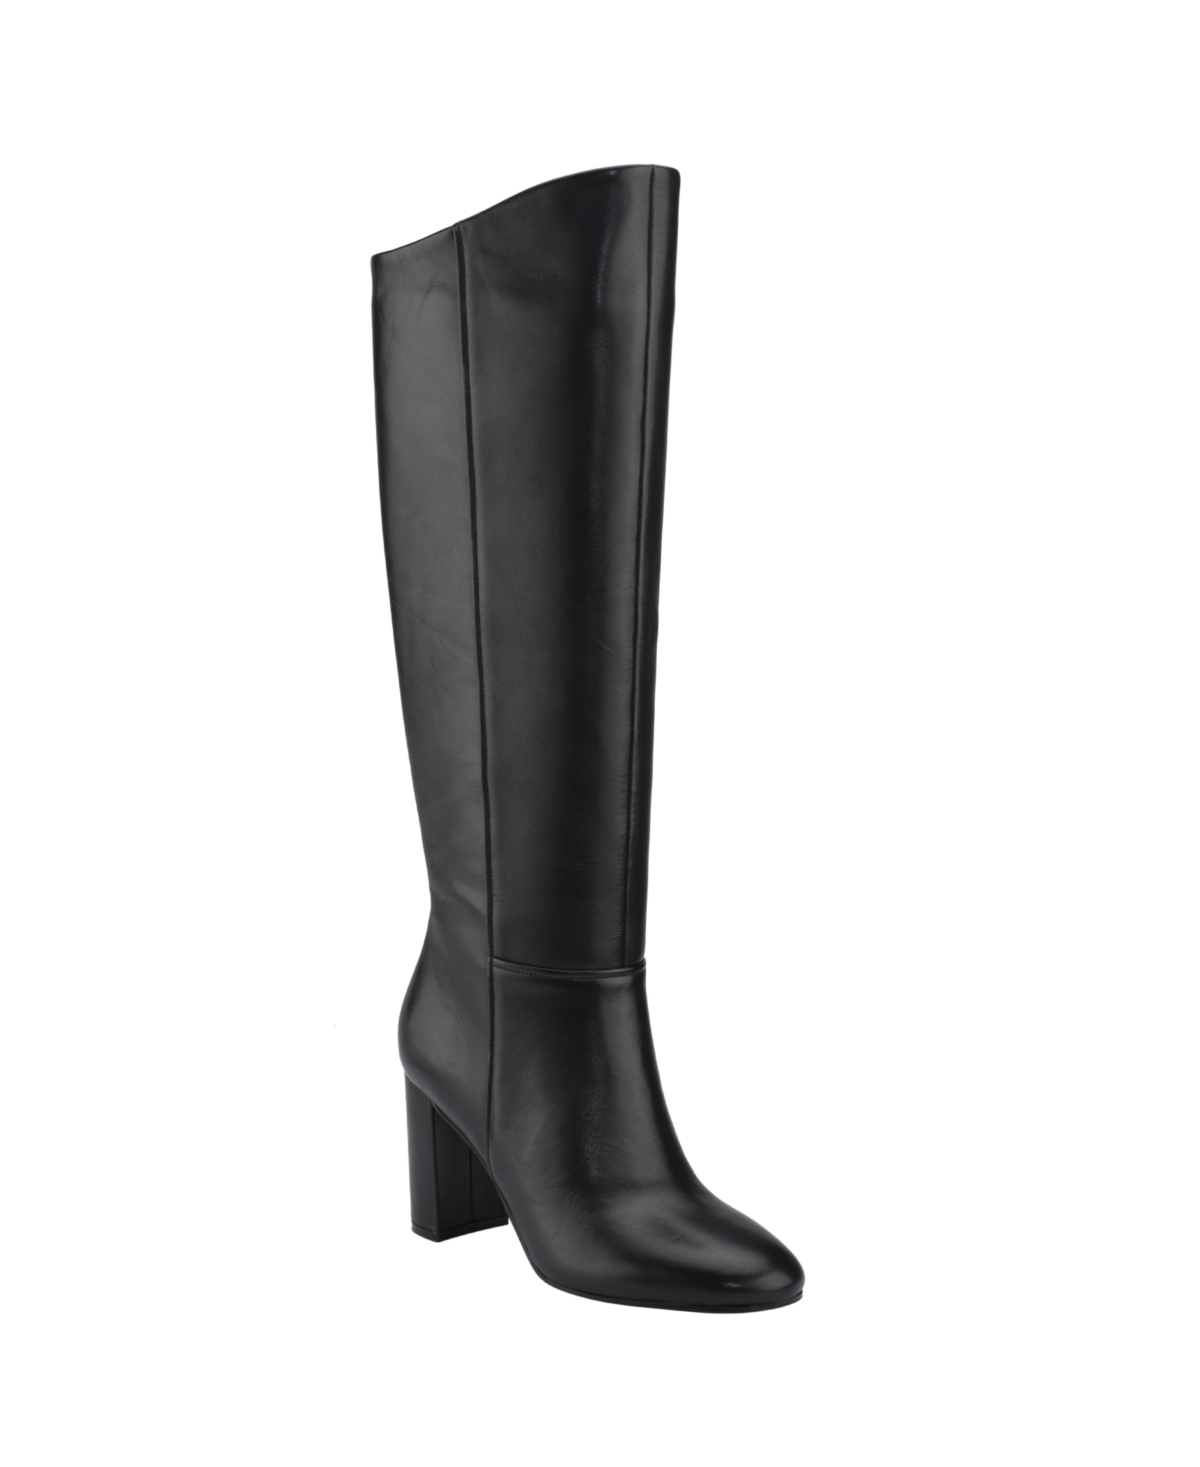 UPC 196496677212 product image for Calvin Klein Women's Almay Tall Knee High Heeled Dress Boots Women's Shoes | upcitemdb.com